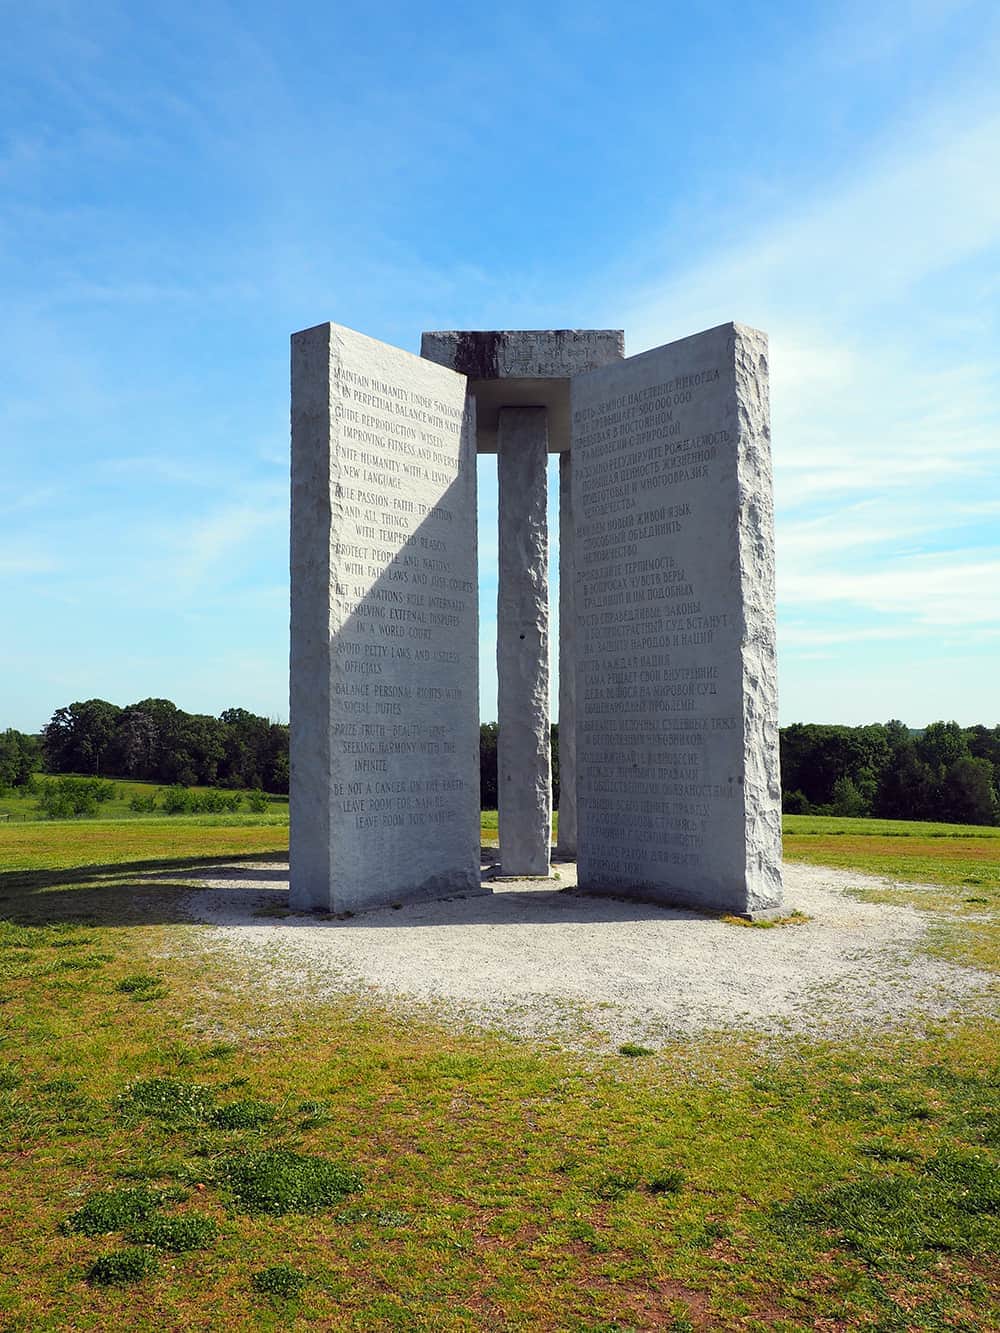 the Georgia Guidestones make an interesting short Georgia road trip. Conspiracies or facts blur on this one which makes it even more interesting to visit! | via Autumn All Along